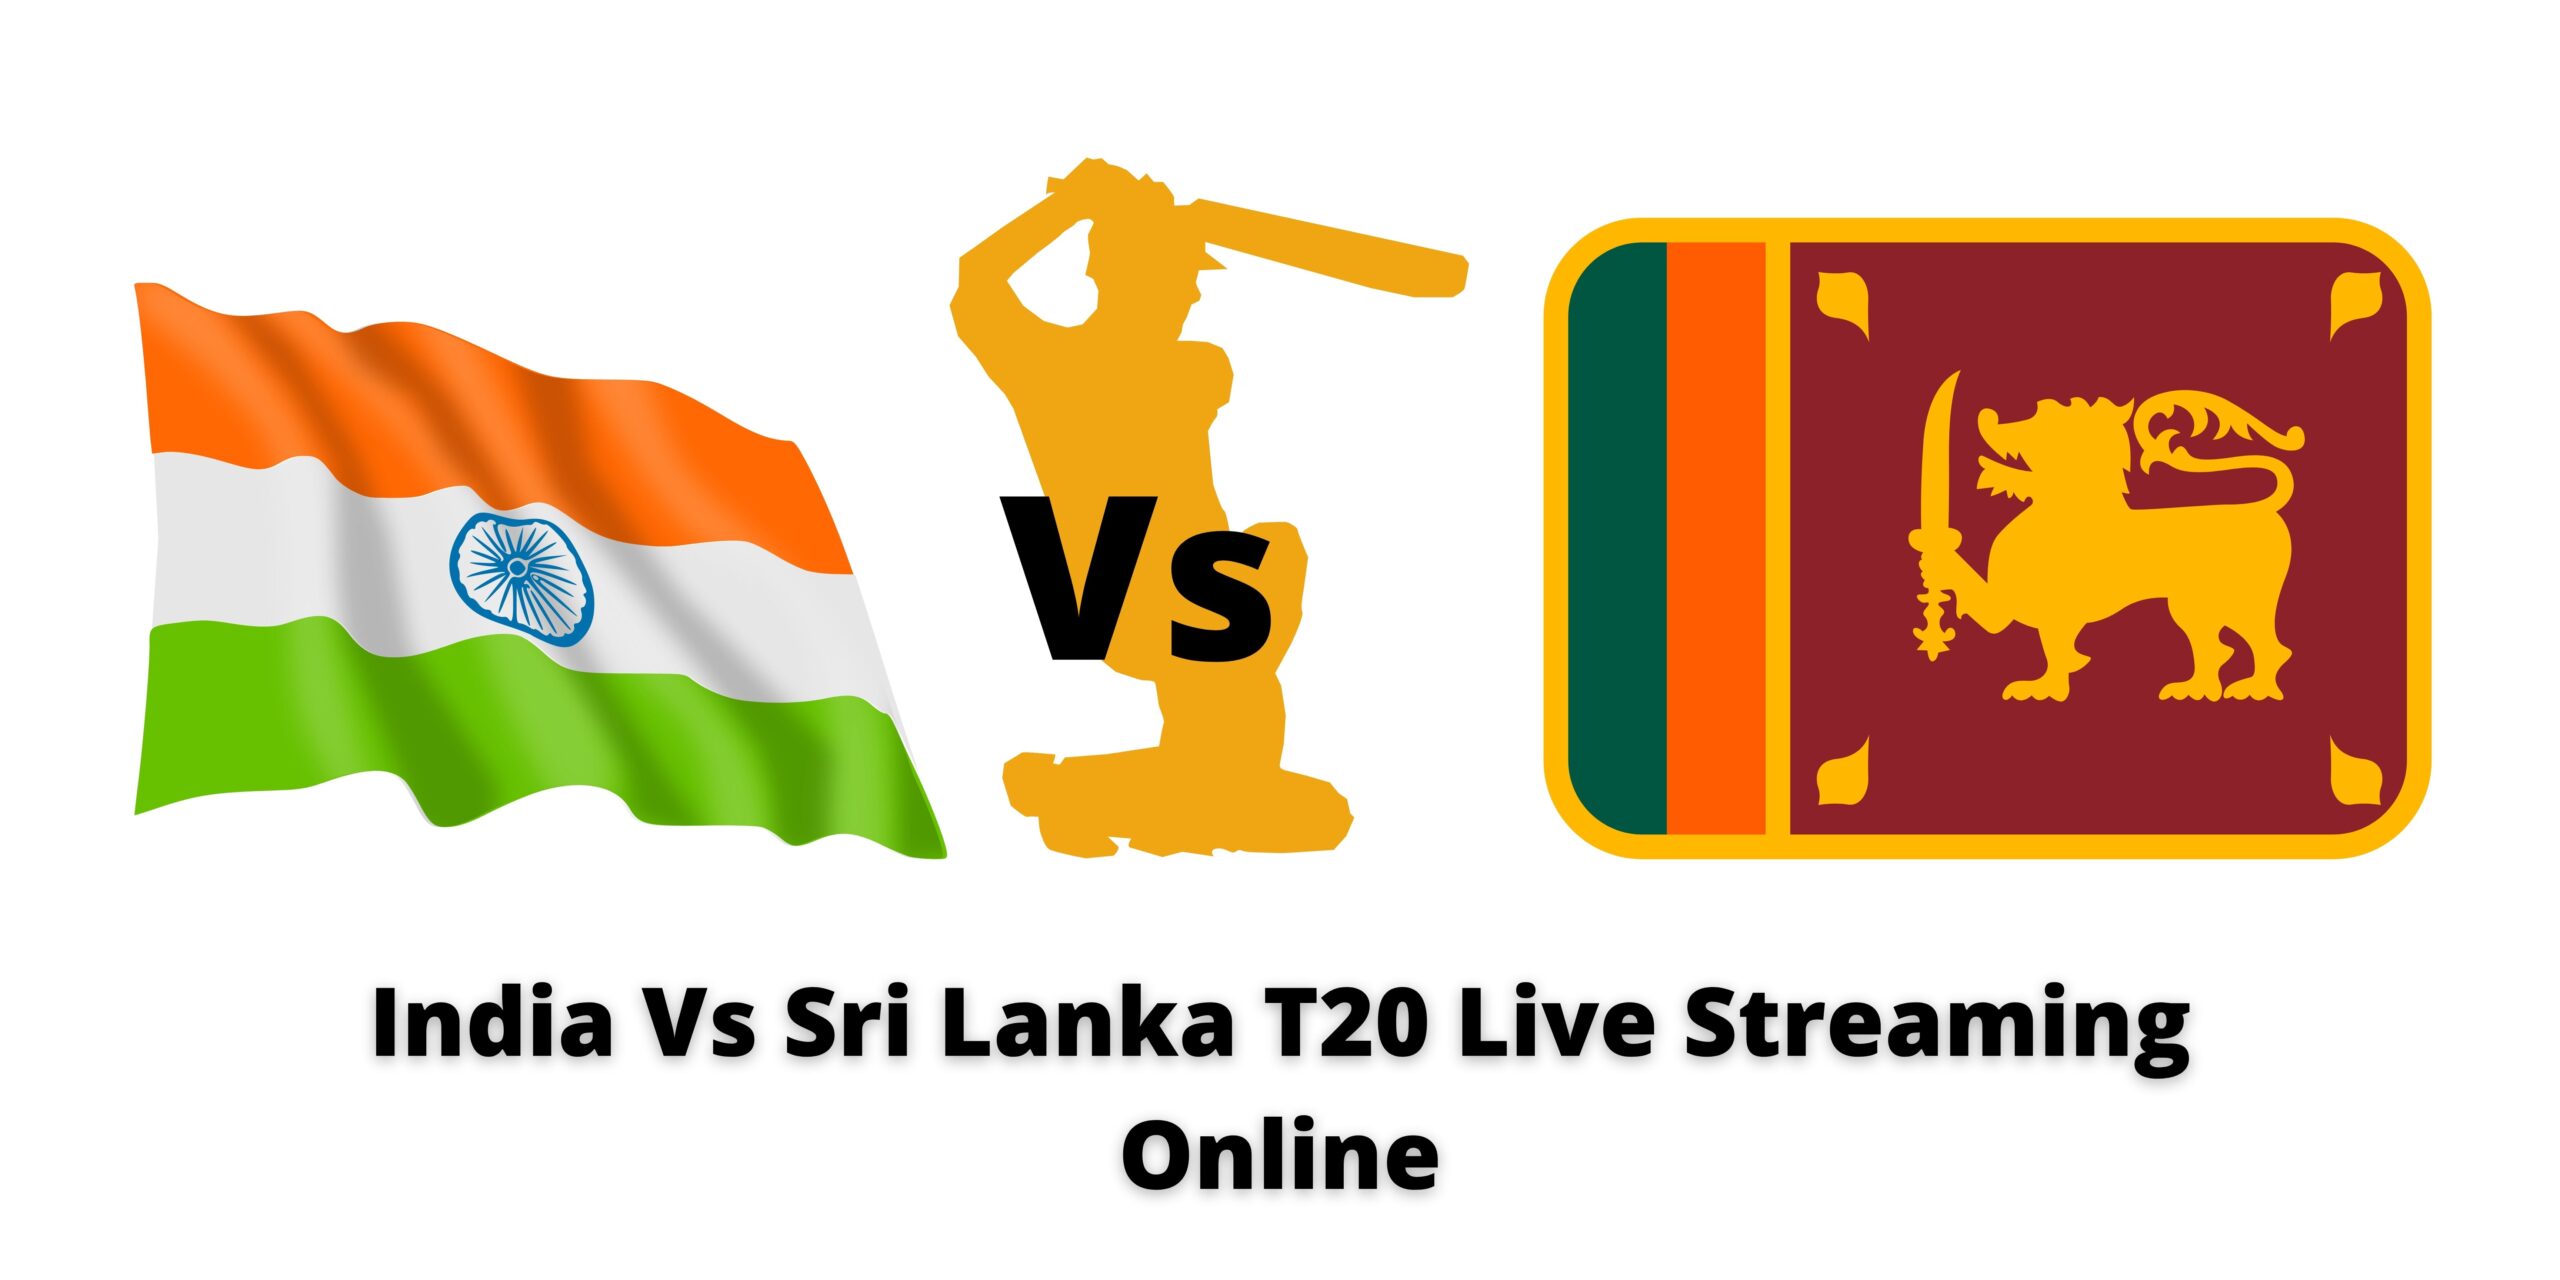 How To Watch India Vs Sri Lanka T20 Live Streaming Online